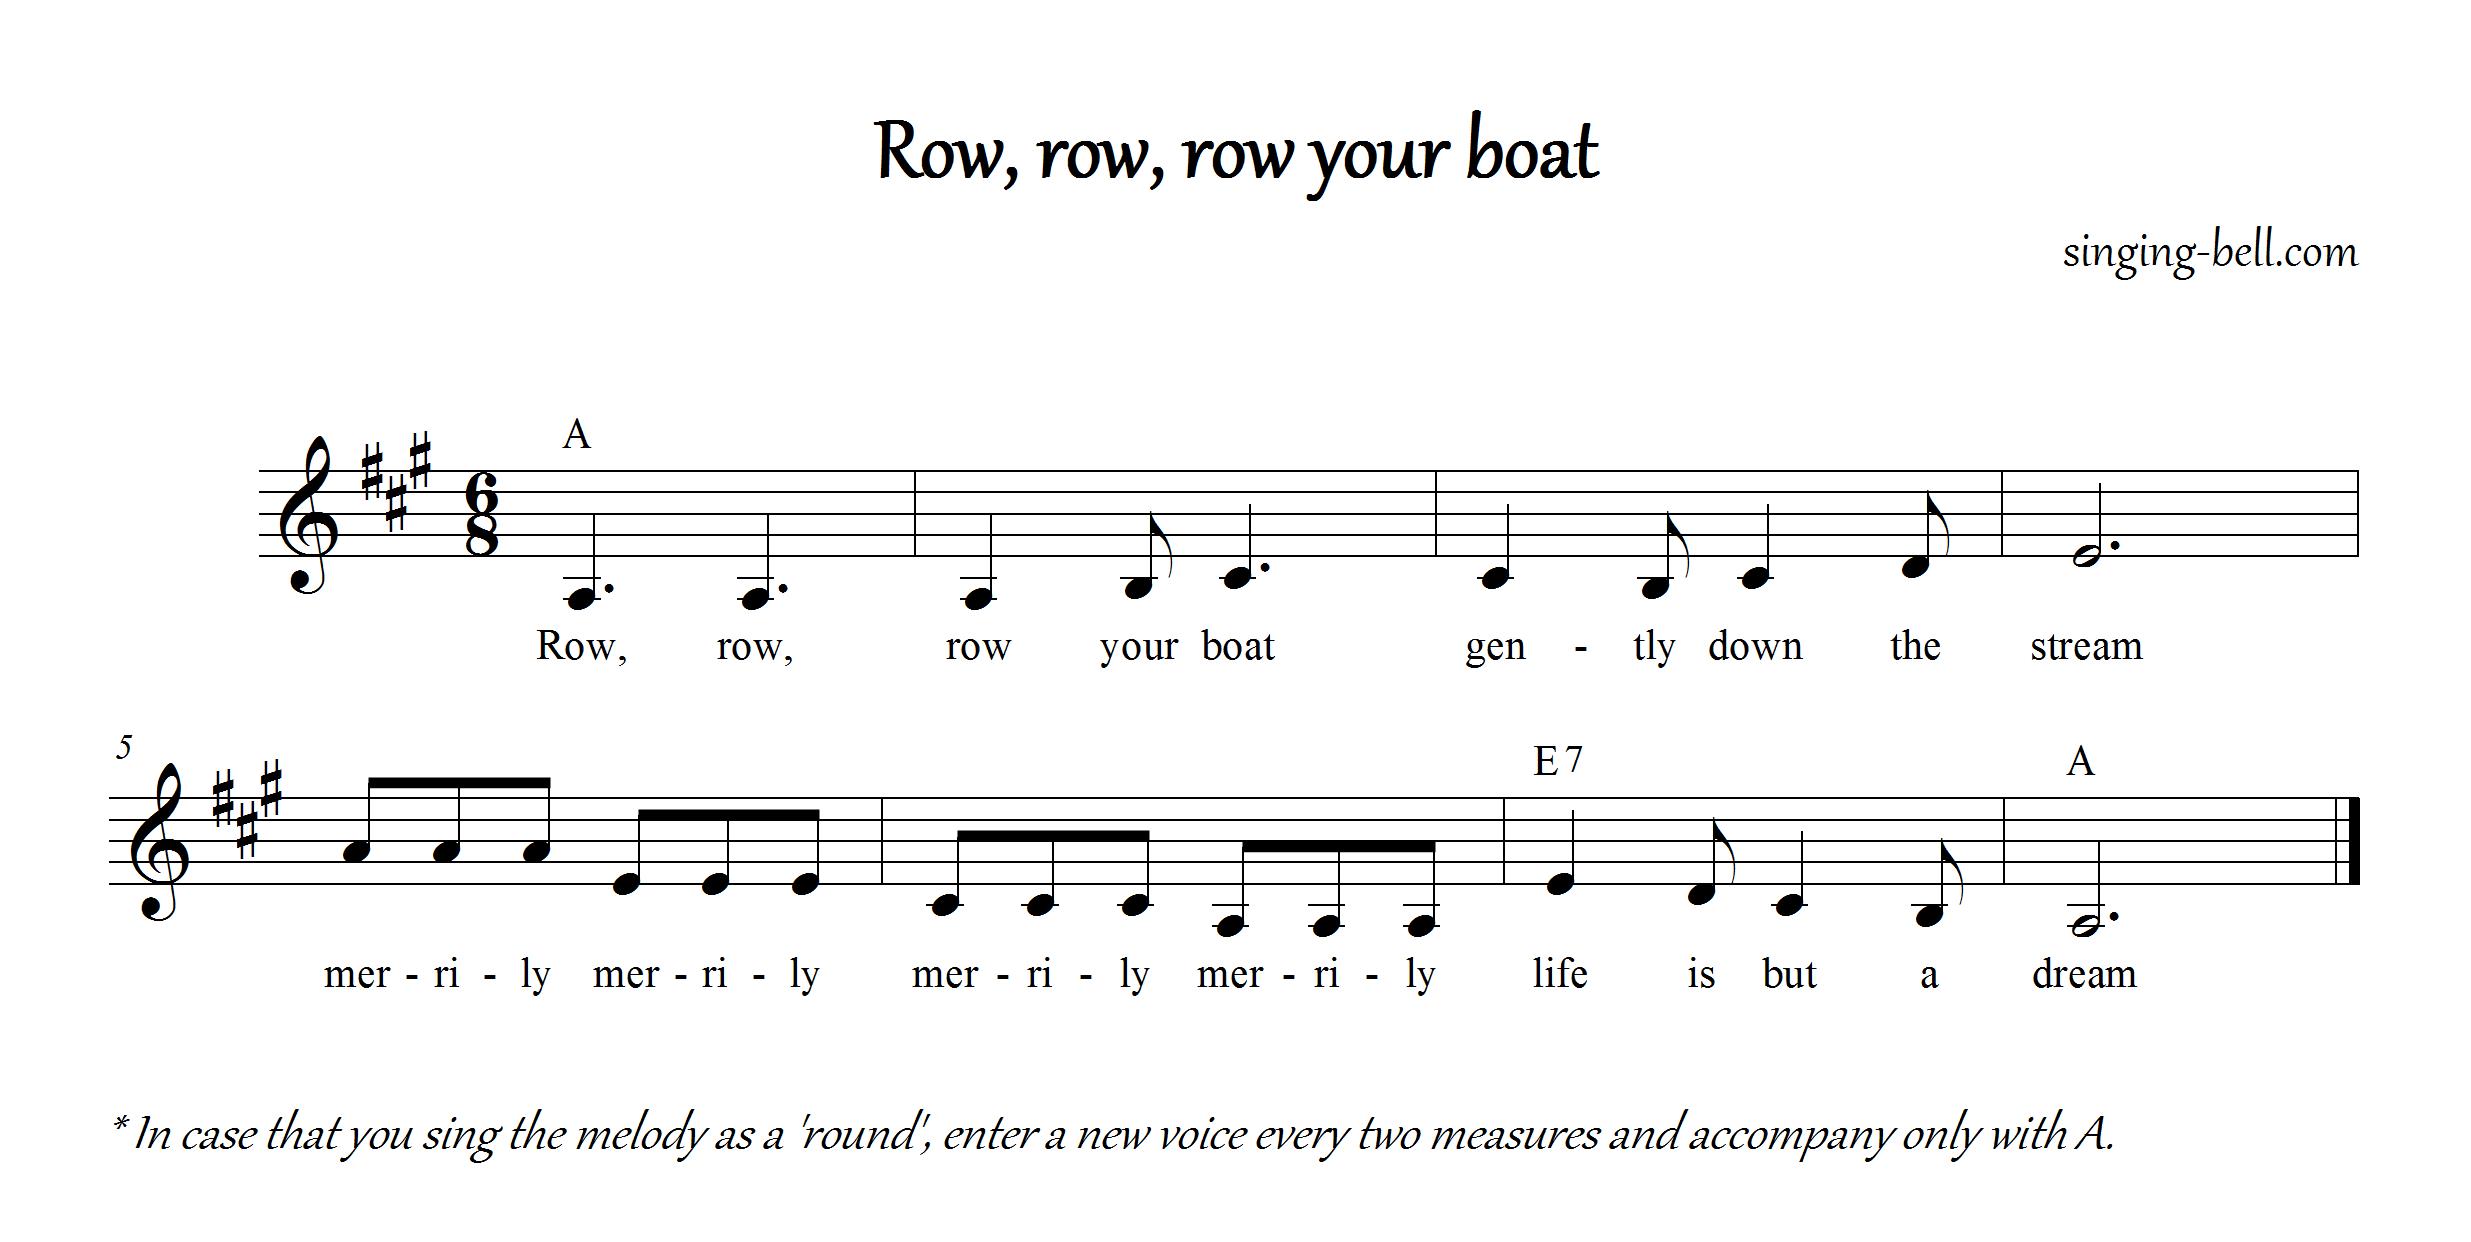 Row row row your boat_A_singing-bell